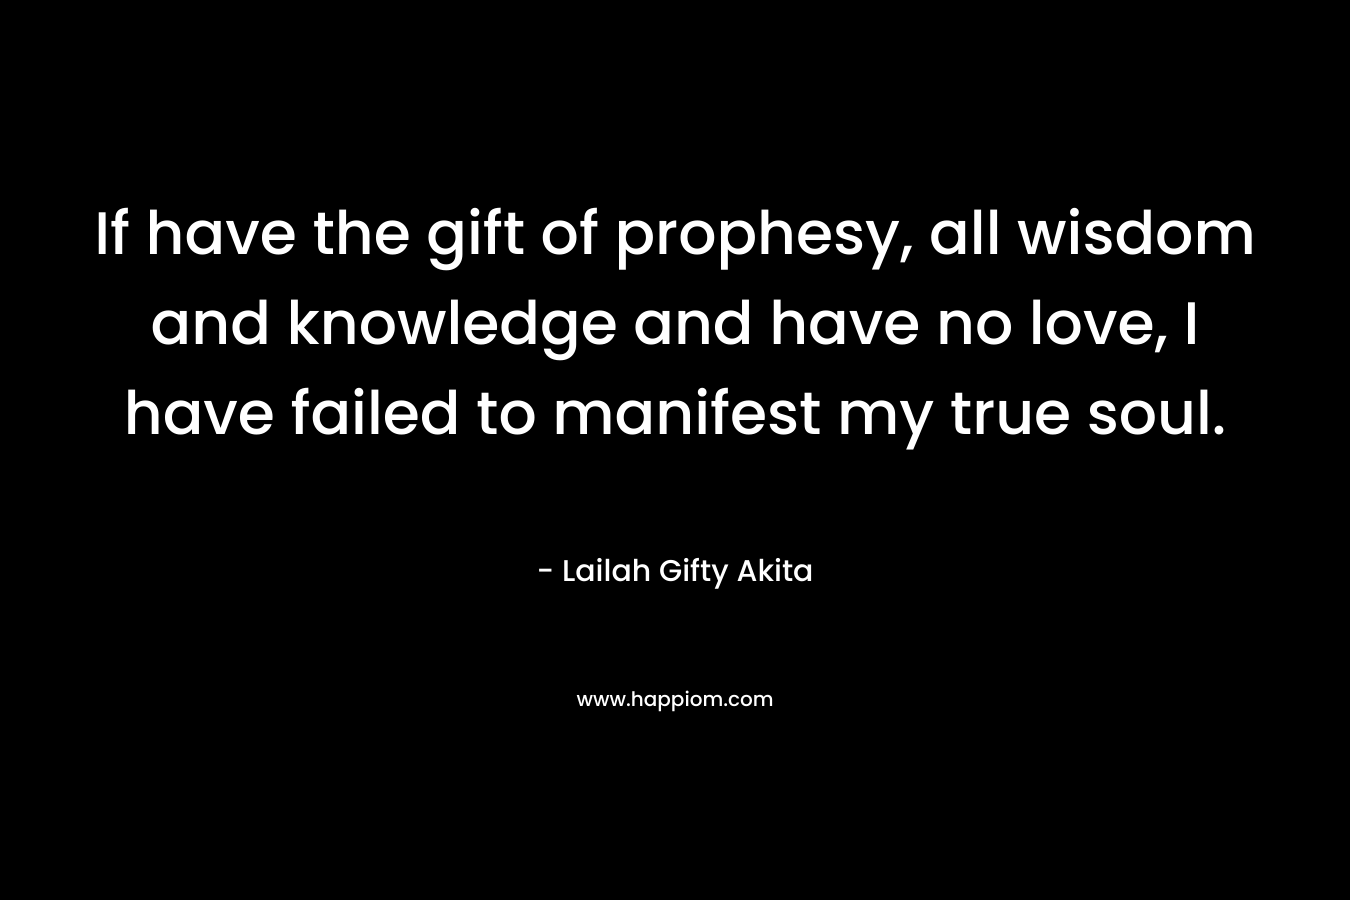 If have the gift of prophesy, all wisdom and knowledge and have no love, I have failed to manifest my true soul. – Lailah Gifty Akita